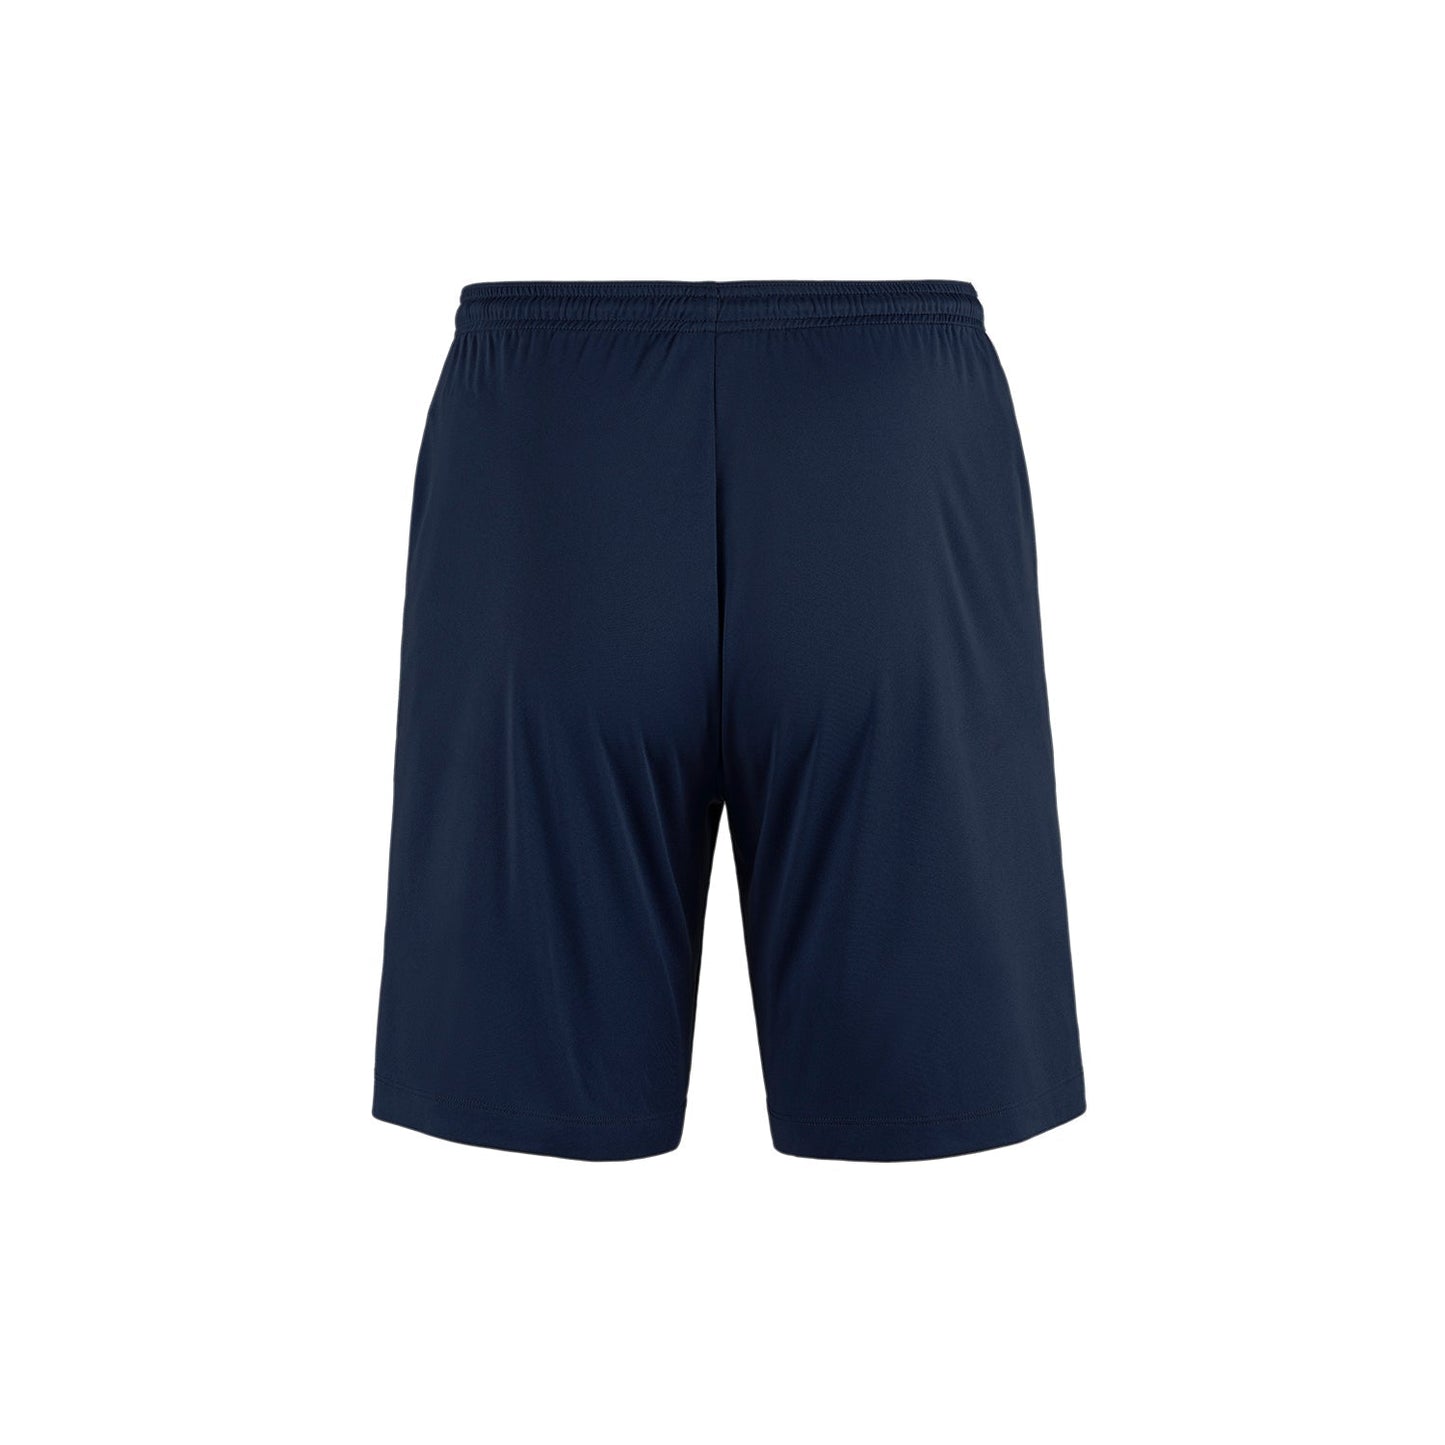 P04475 - Wave - Athletic Short with Pockets - Bottoms/Shorts